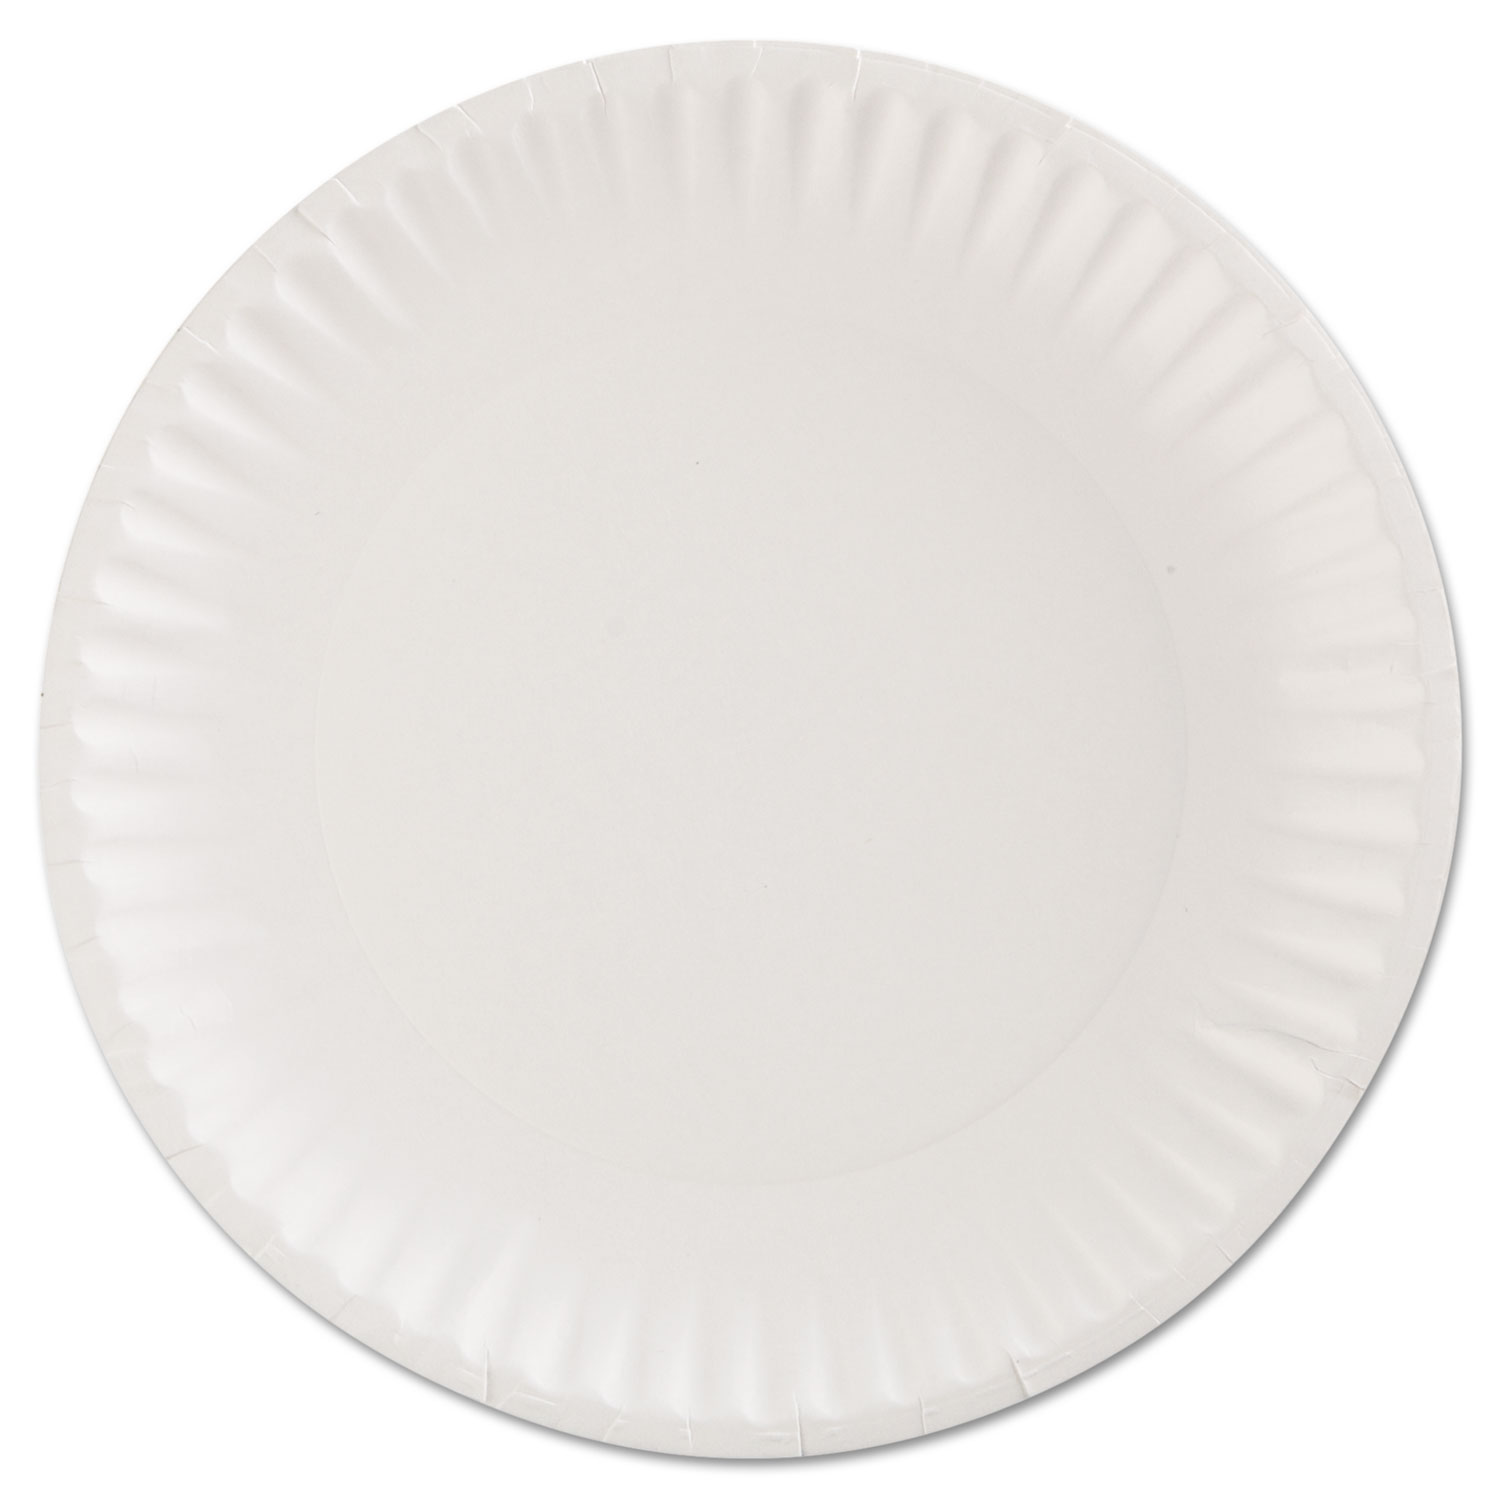 Gold Label Coated Paper Plates, 9